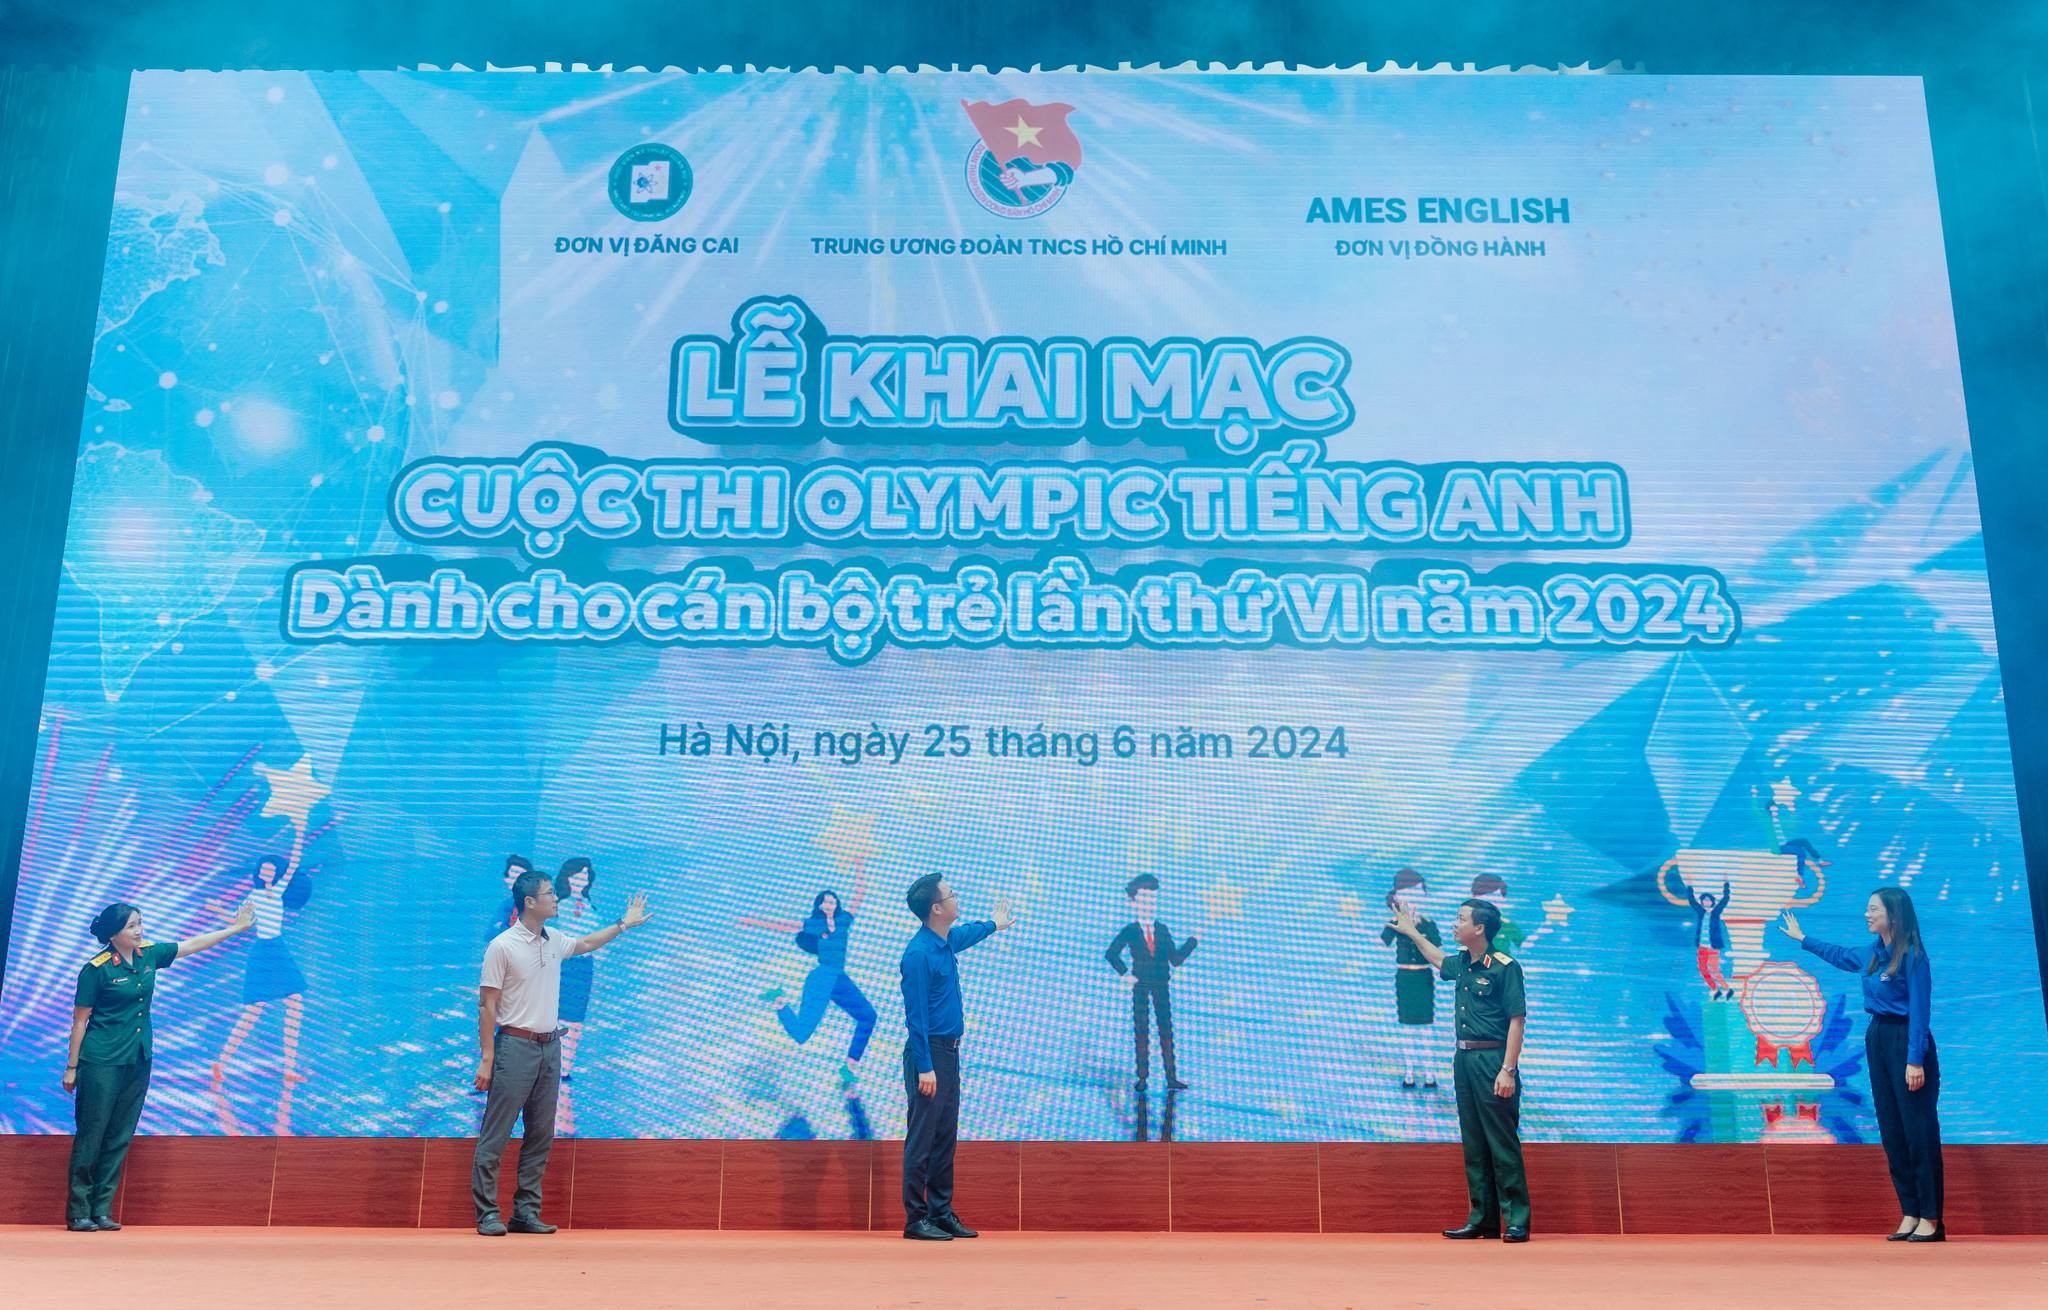 cuoc-thi-olympic-tieng-anh-1-1719369517.jpg